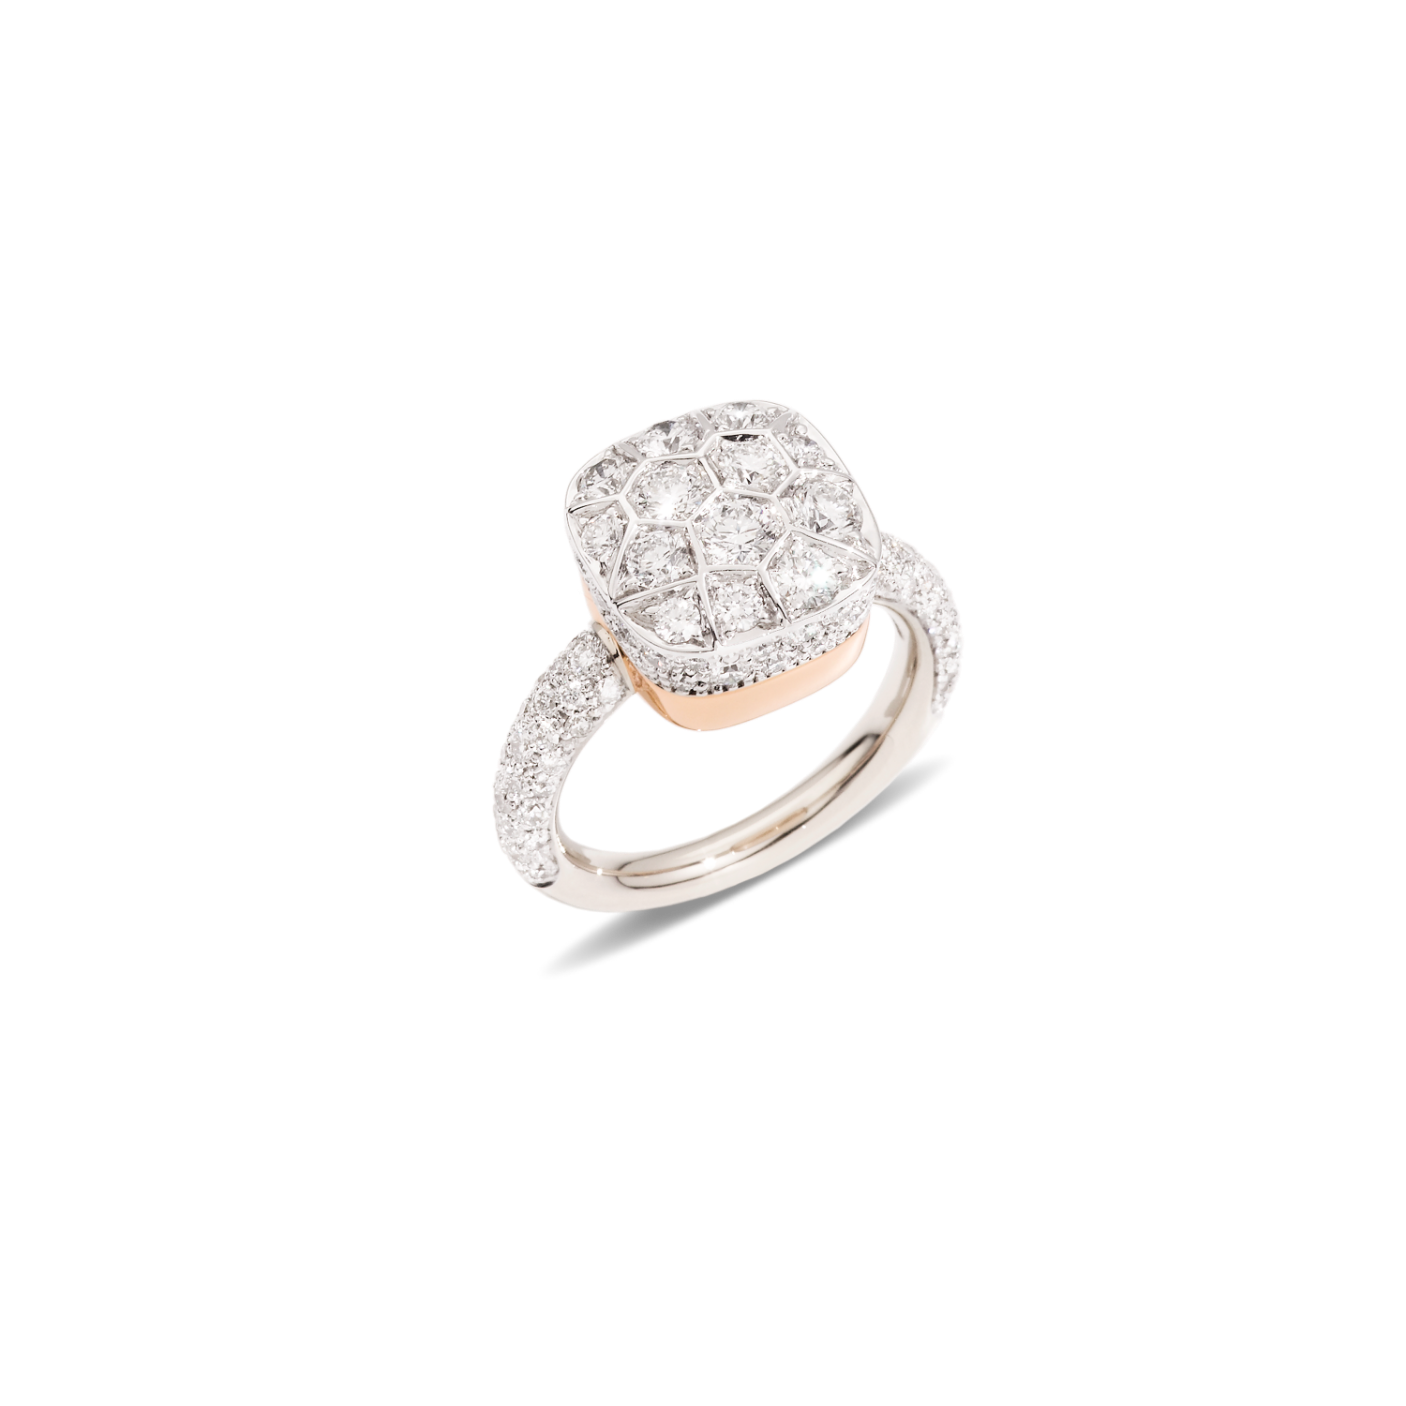 PAB7041_O6000_DB000_010_Pomellato_ring-nudo-solitaire-white-gold-18kt-rose-gold-18kt-diamond.png